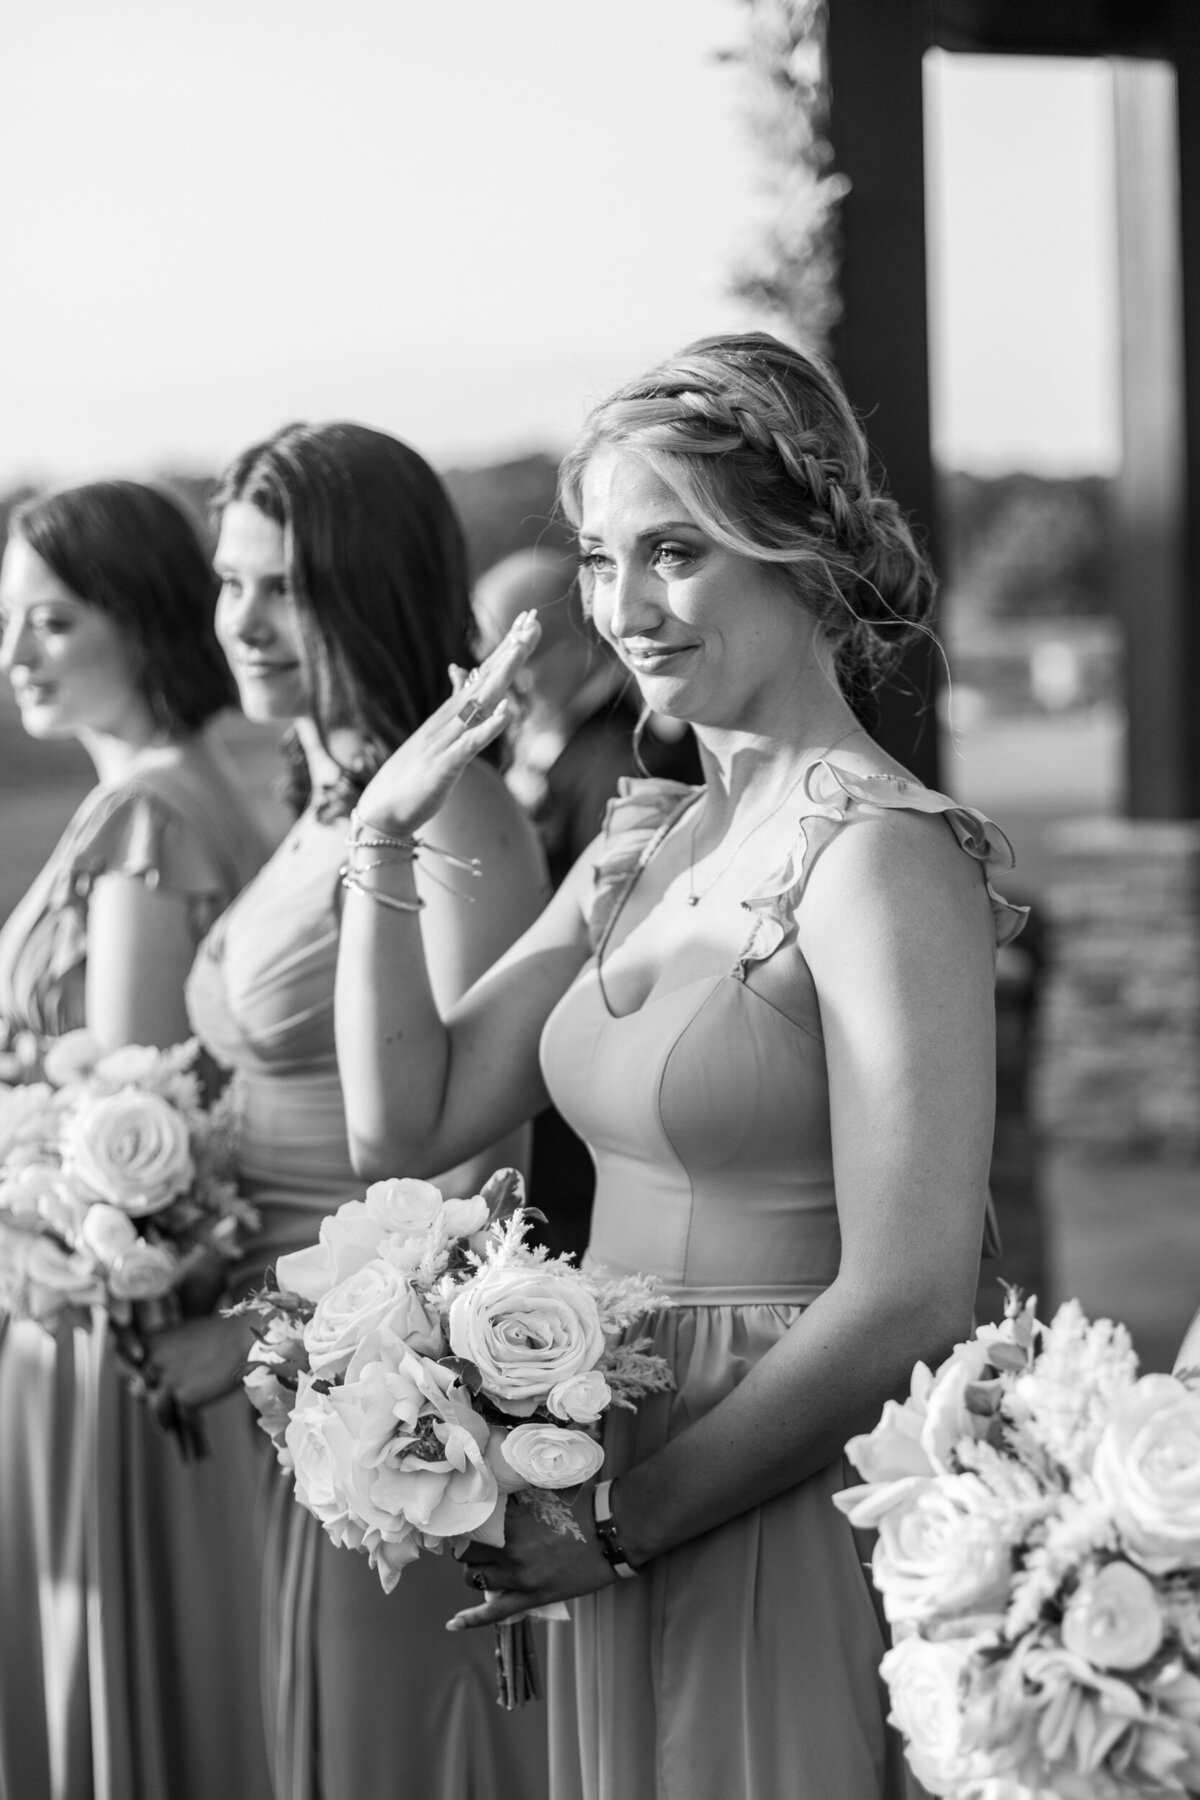 A bridesmaid reaches up to wipe away her tear when she sees her best friend walk down the aisle at her Charlotte area wedding.